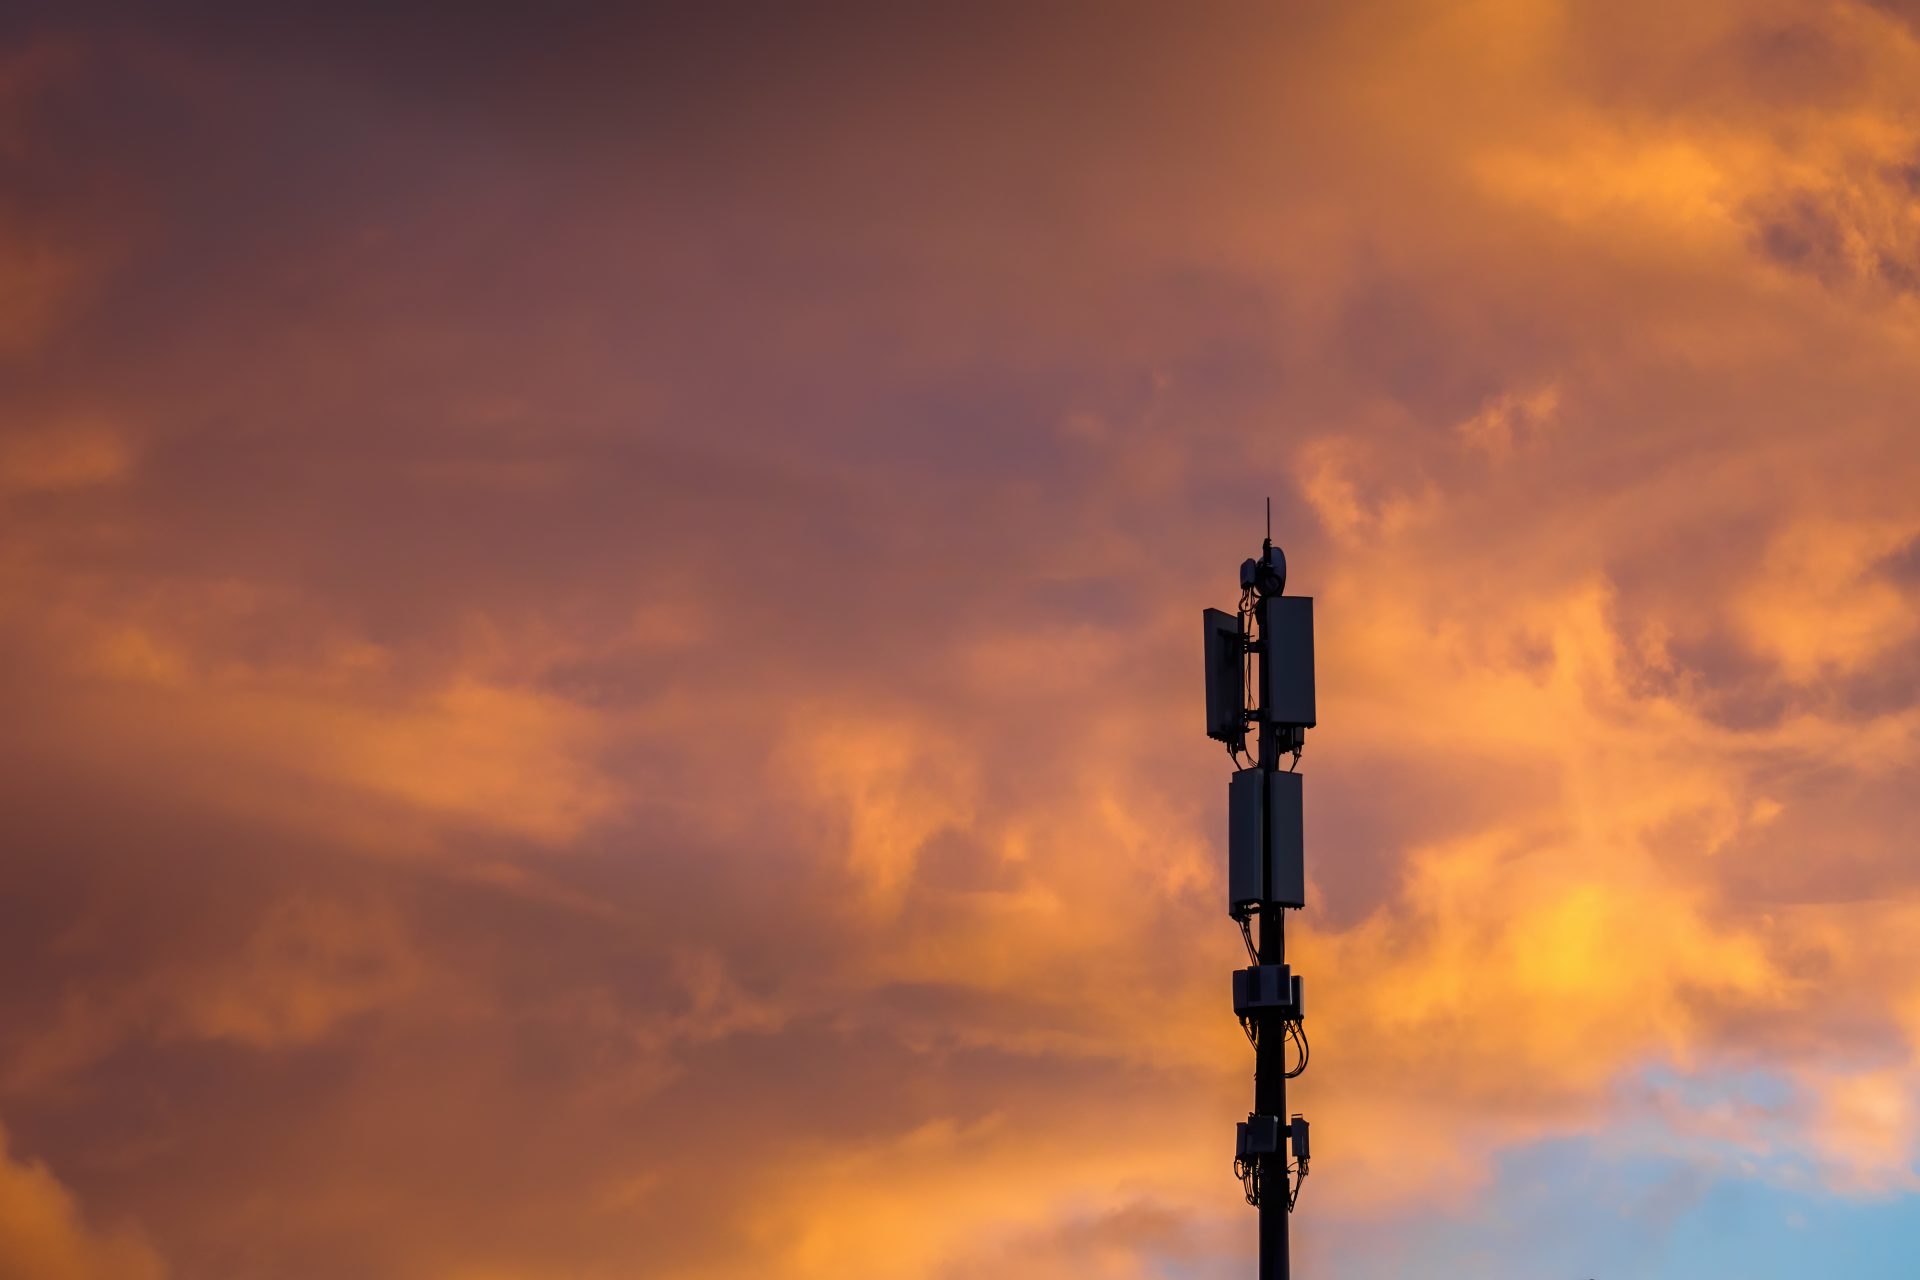 Mobile phone mast against dramatic sunset clouds